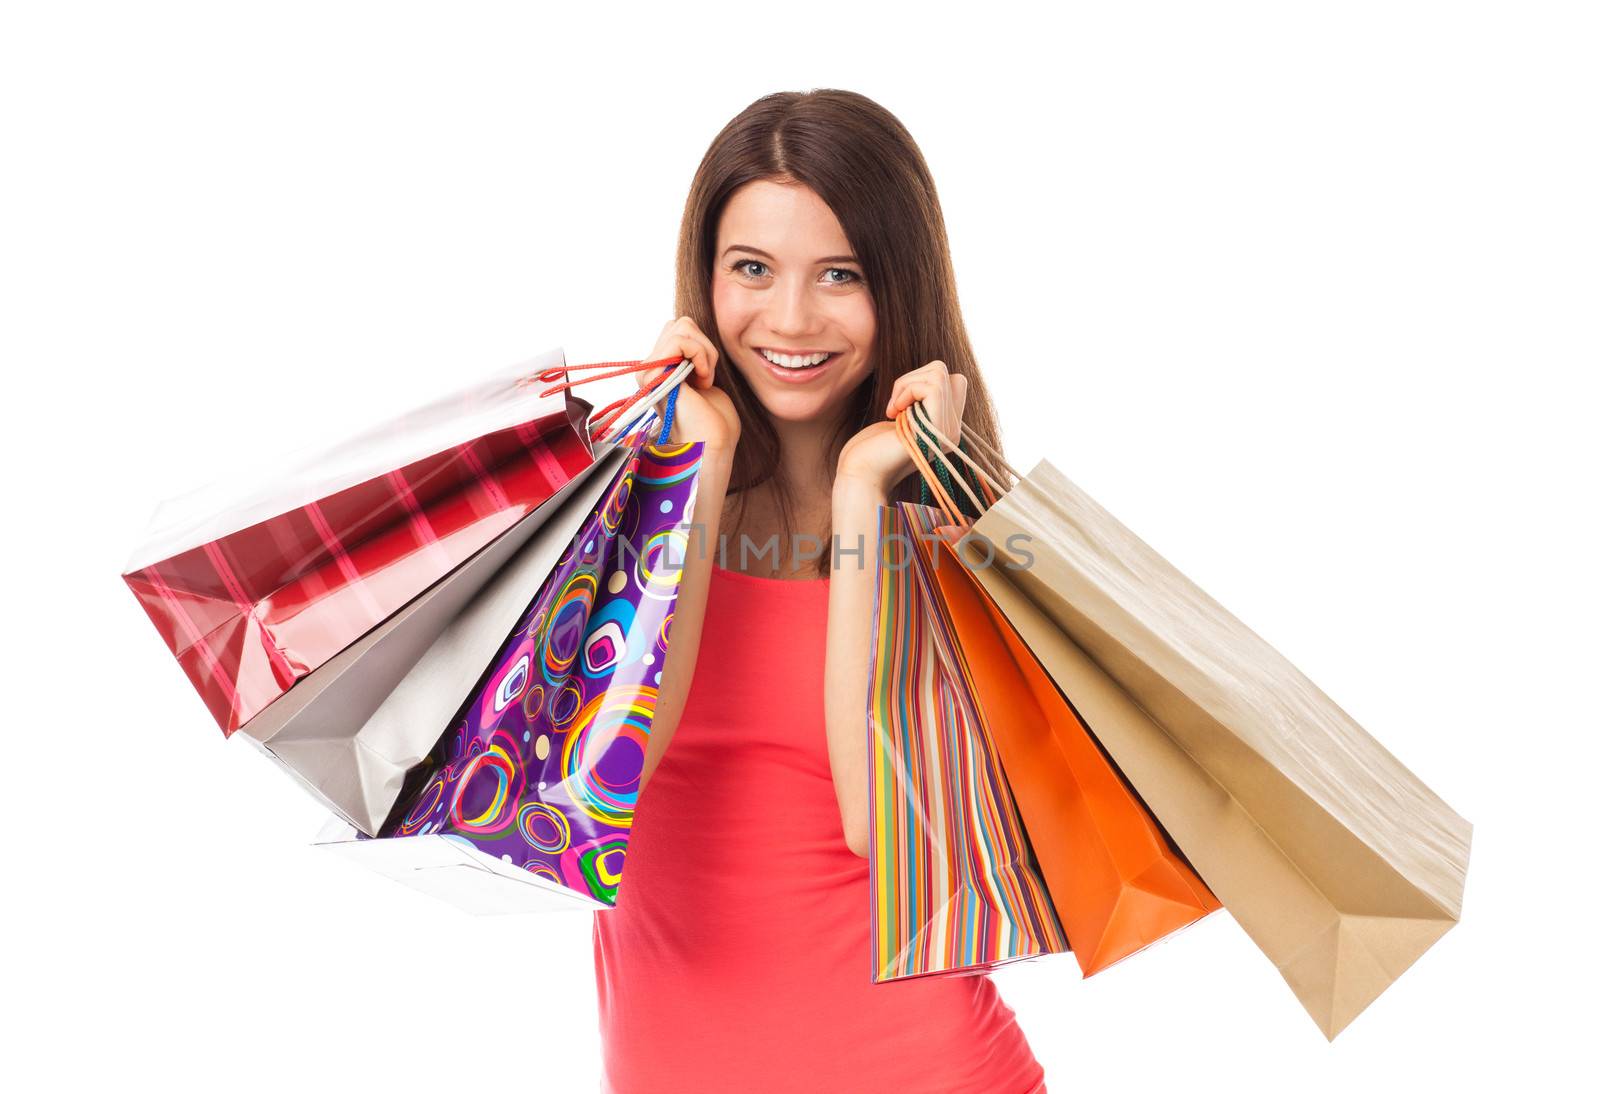 Portrait of a young woman holding shopping bags and smiling, isolated on white